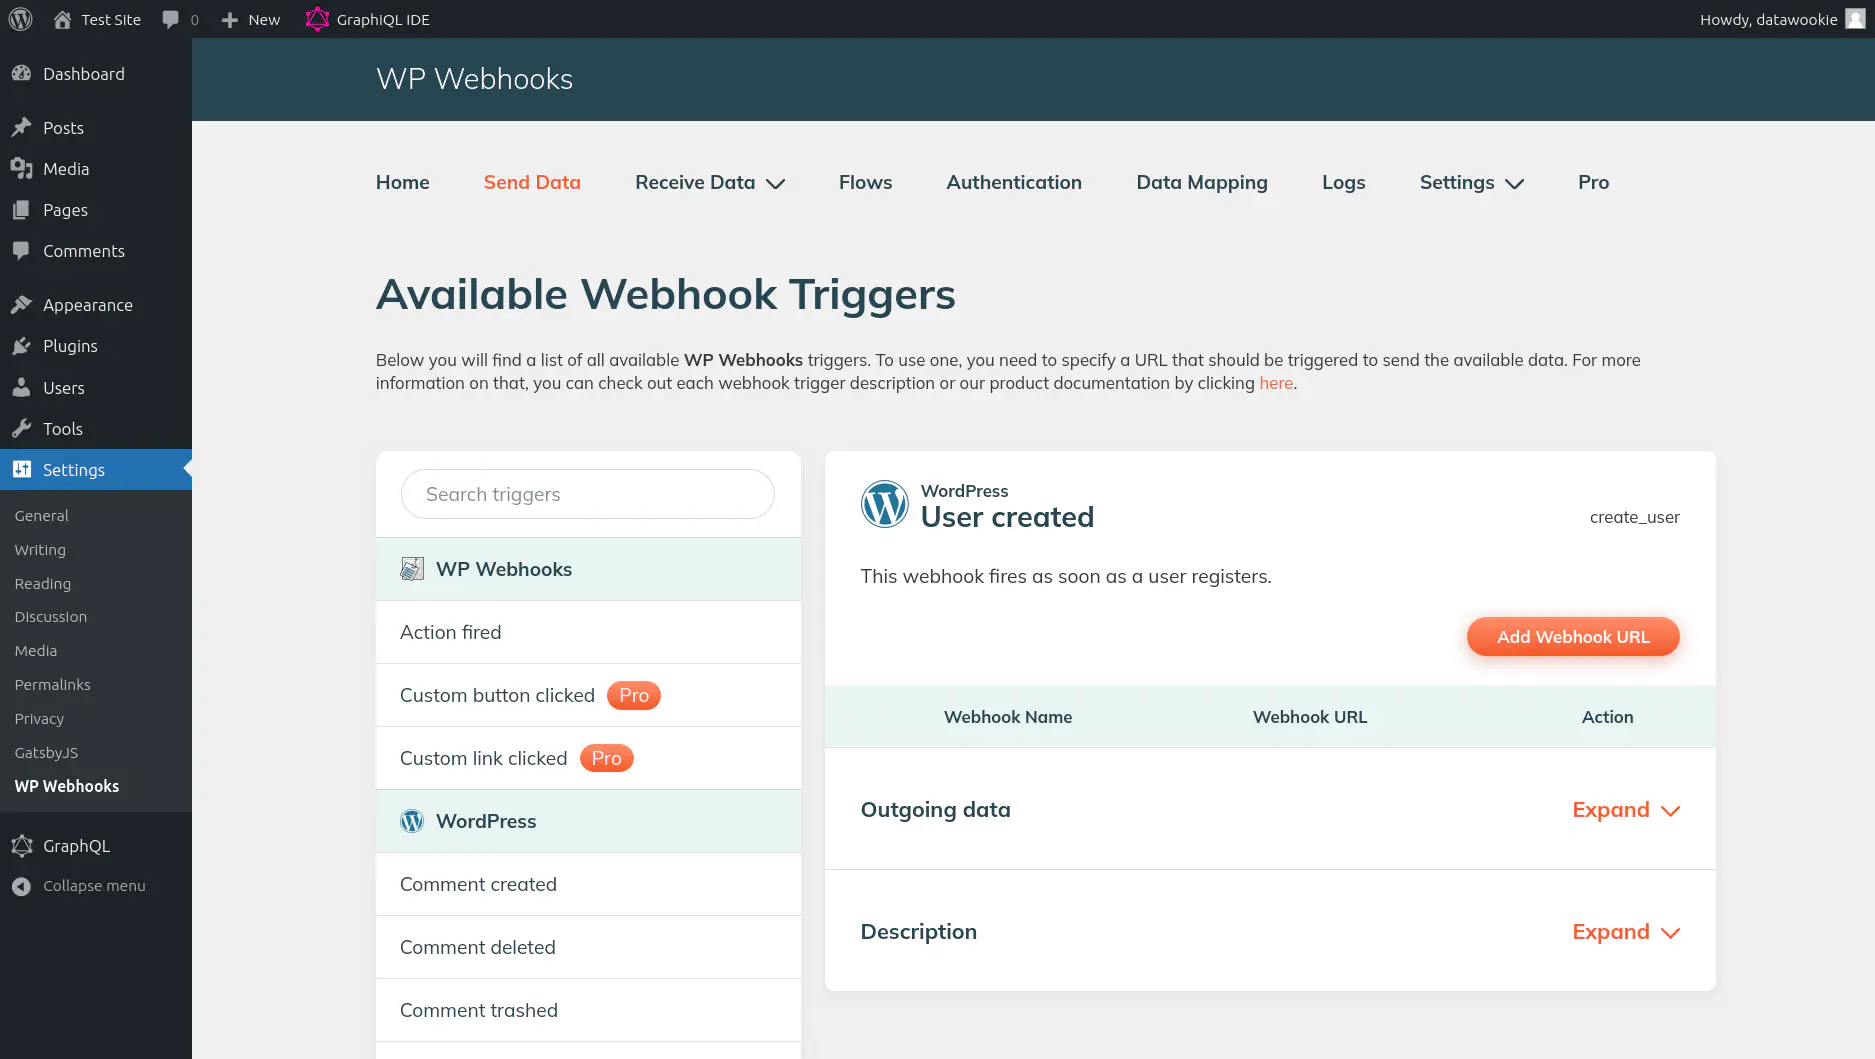 Send data triggers for the WP Webhooks plugin.